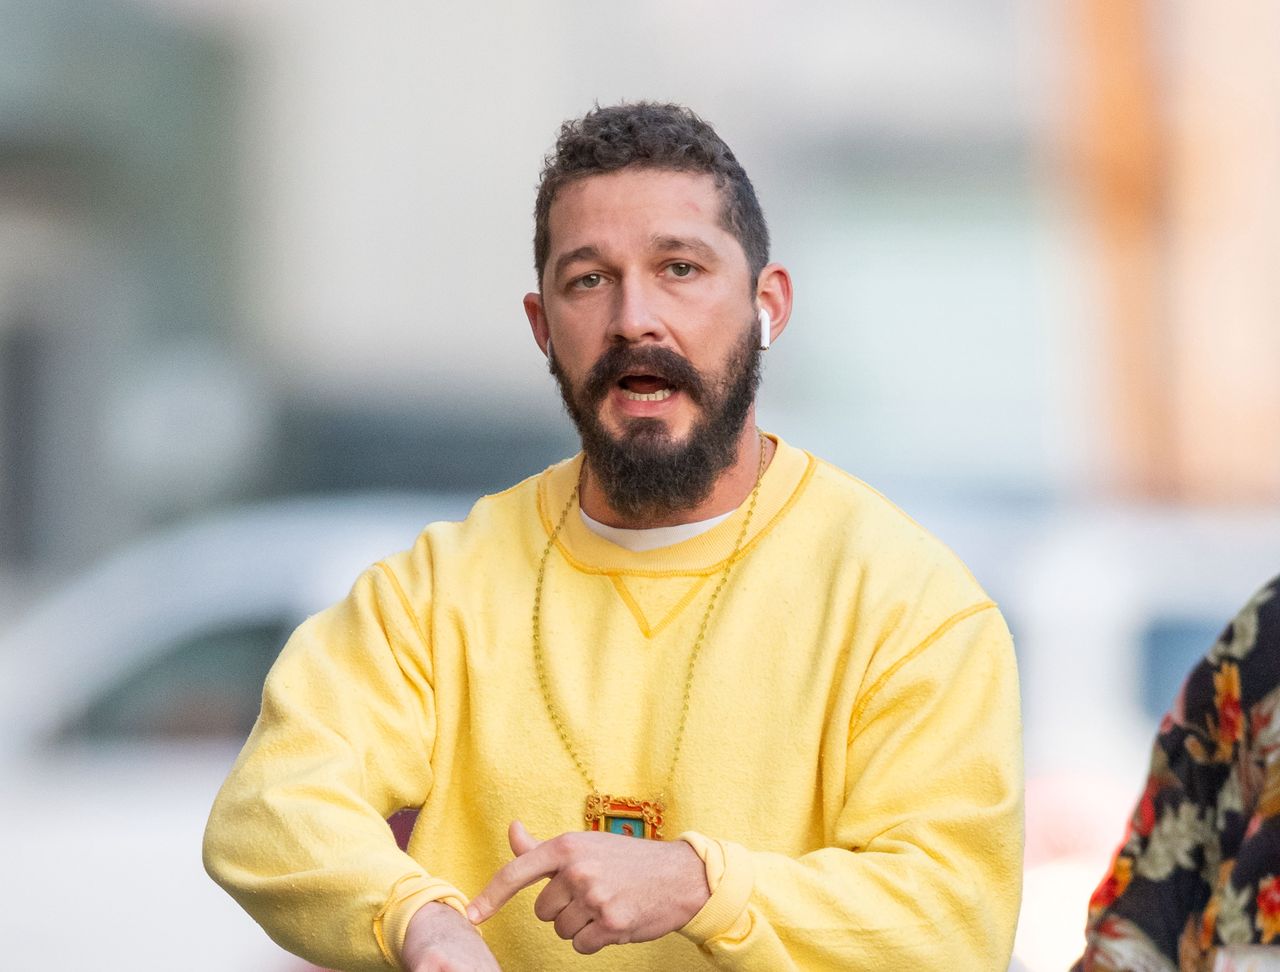 Shia LaBeouf was the chief scandal-maker in Hollywood.